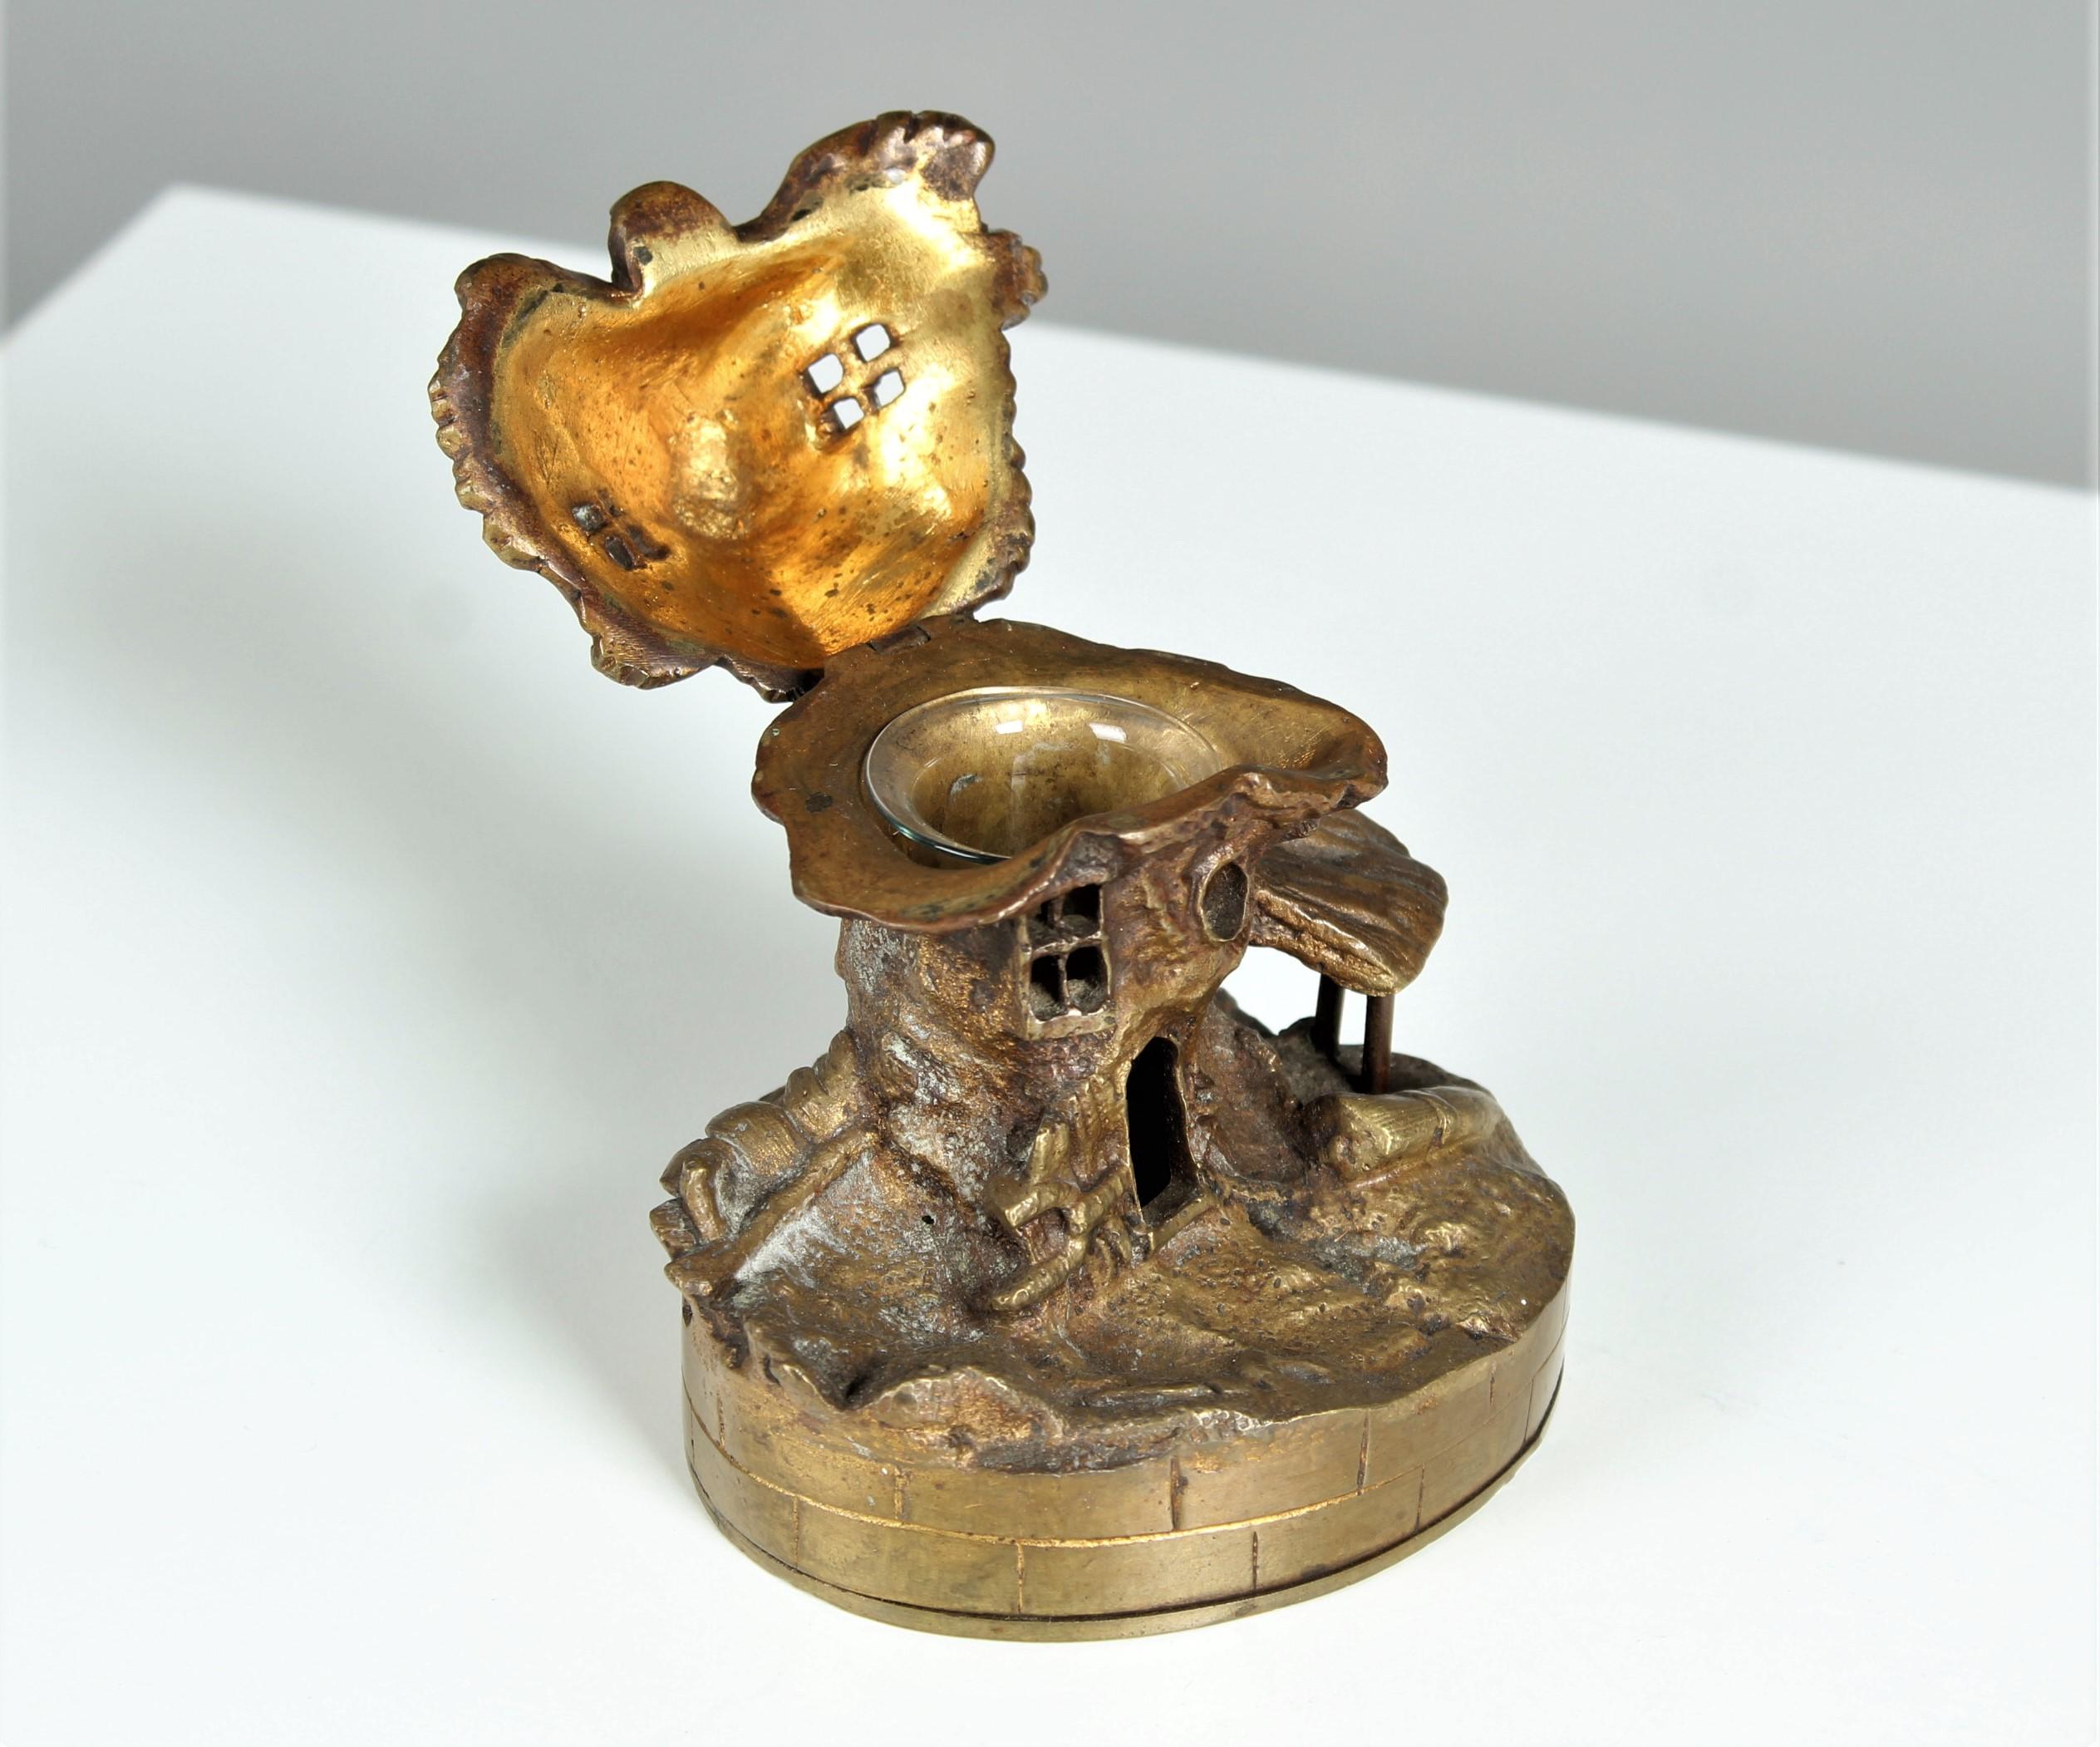 Exceptional antique inkwell made from bronze, gilded.
Little house with cute details.
Nice bronze work, beautifully chiseled.
The original glass insert is existing.
A similar inkwell can be found in the specialized literature: 